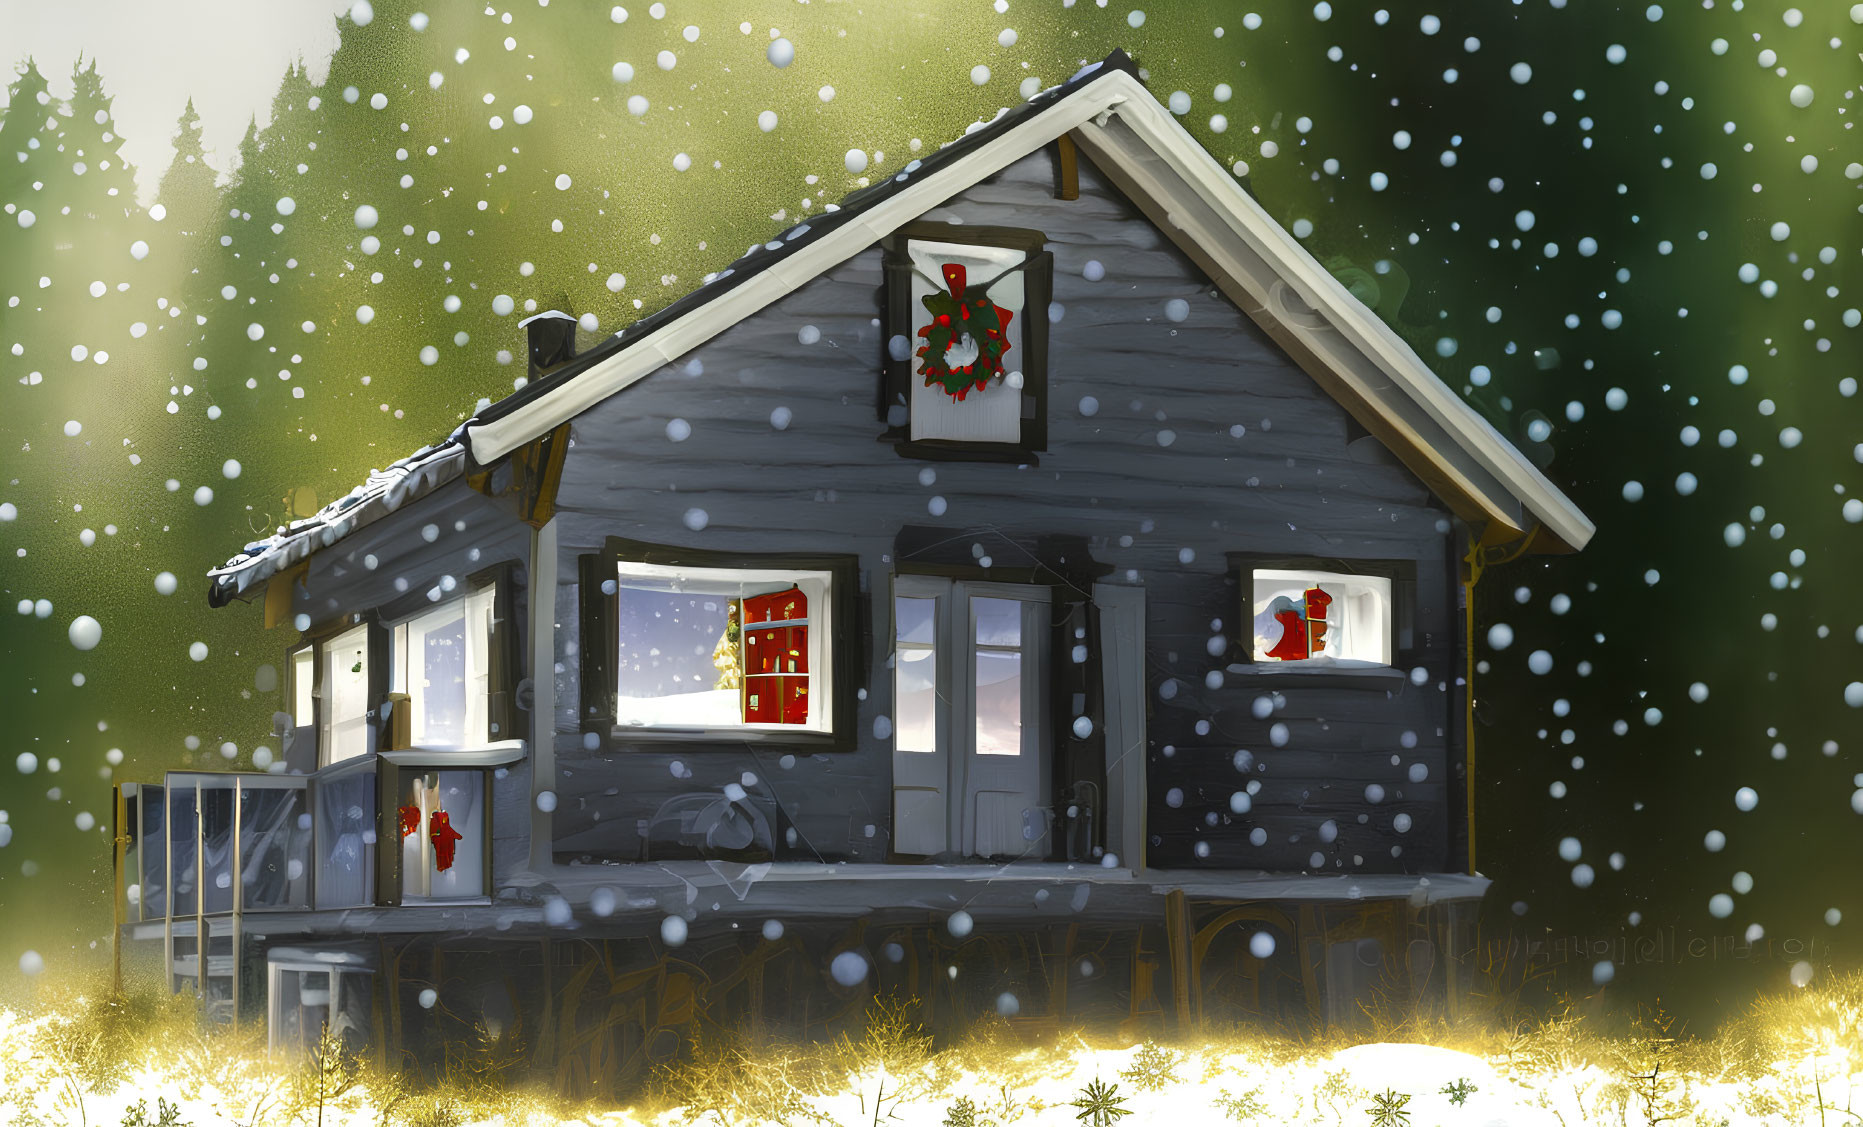 Snowy Christmas cabin with festive decorations in a winter landscape